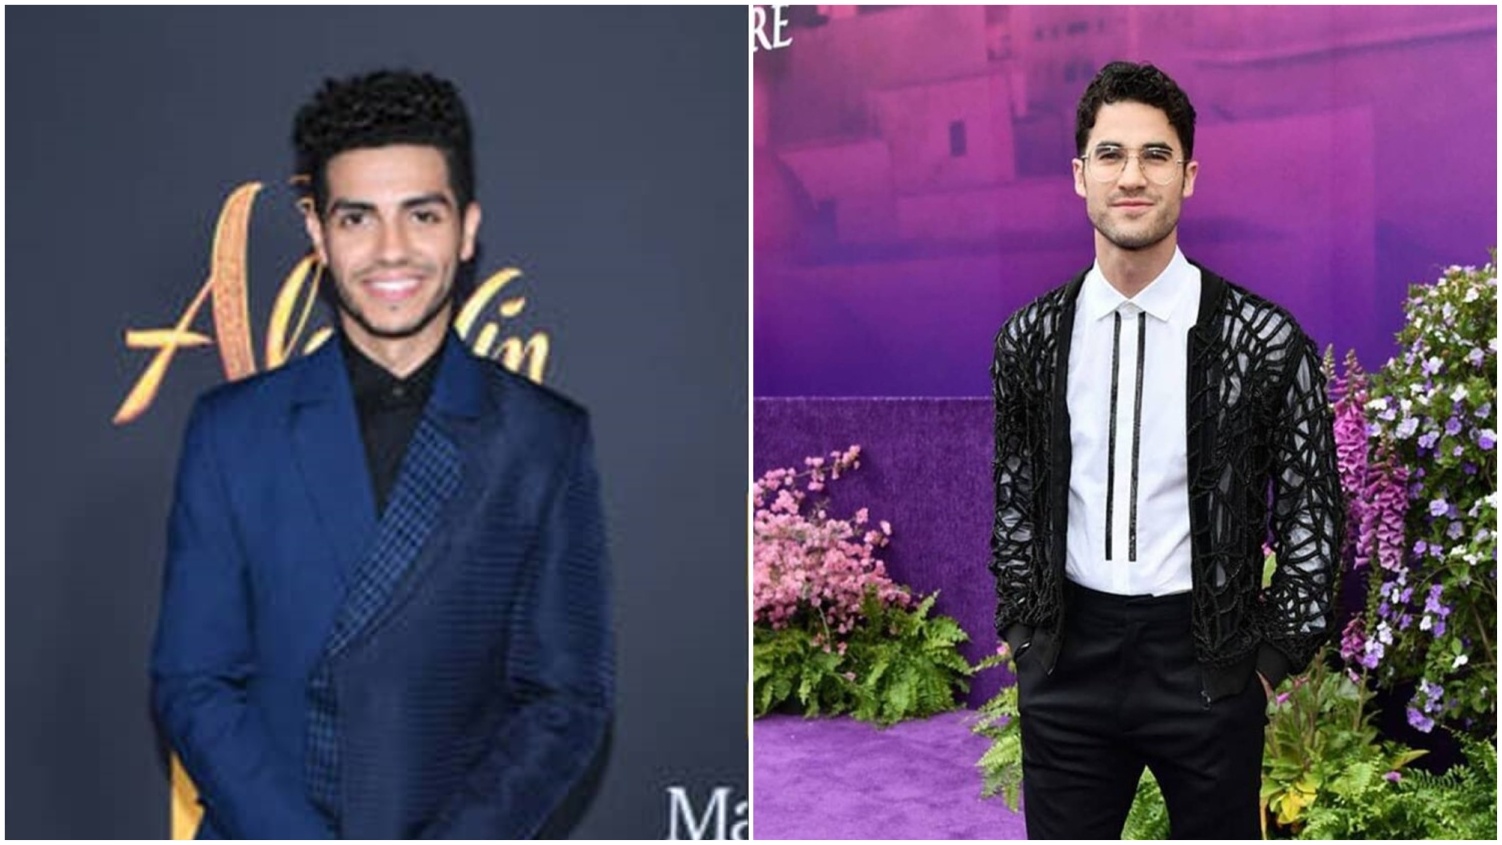 Darren Criss wears a jacket and Mena Massoud dons a suit both created by Francis Libiran.